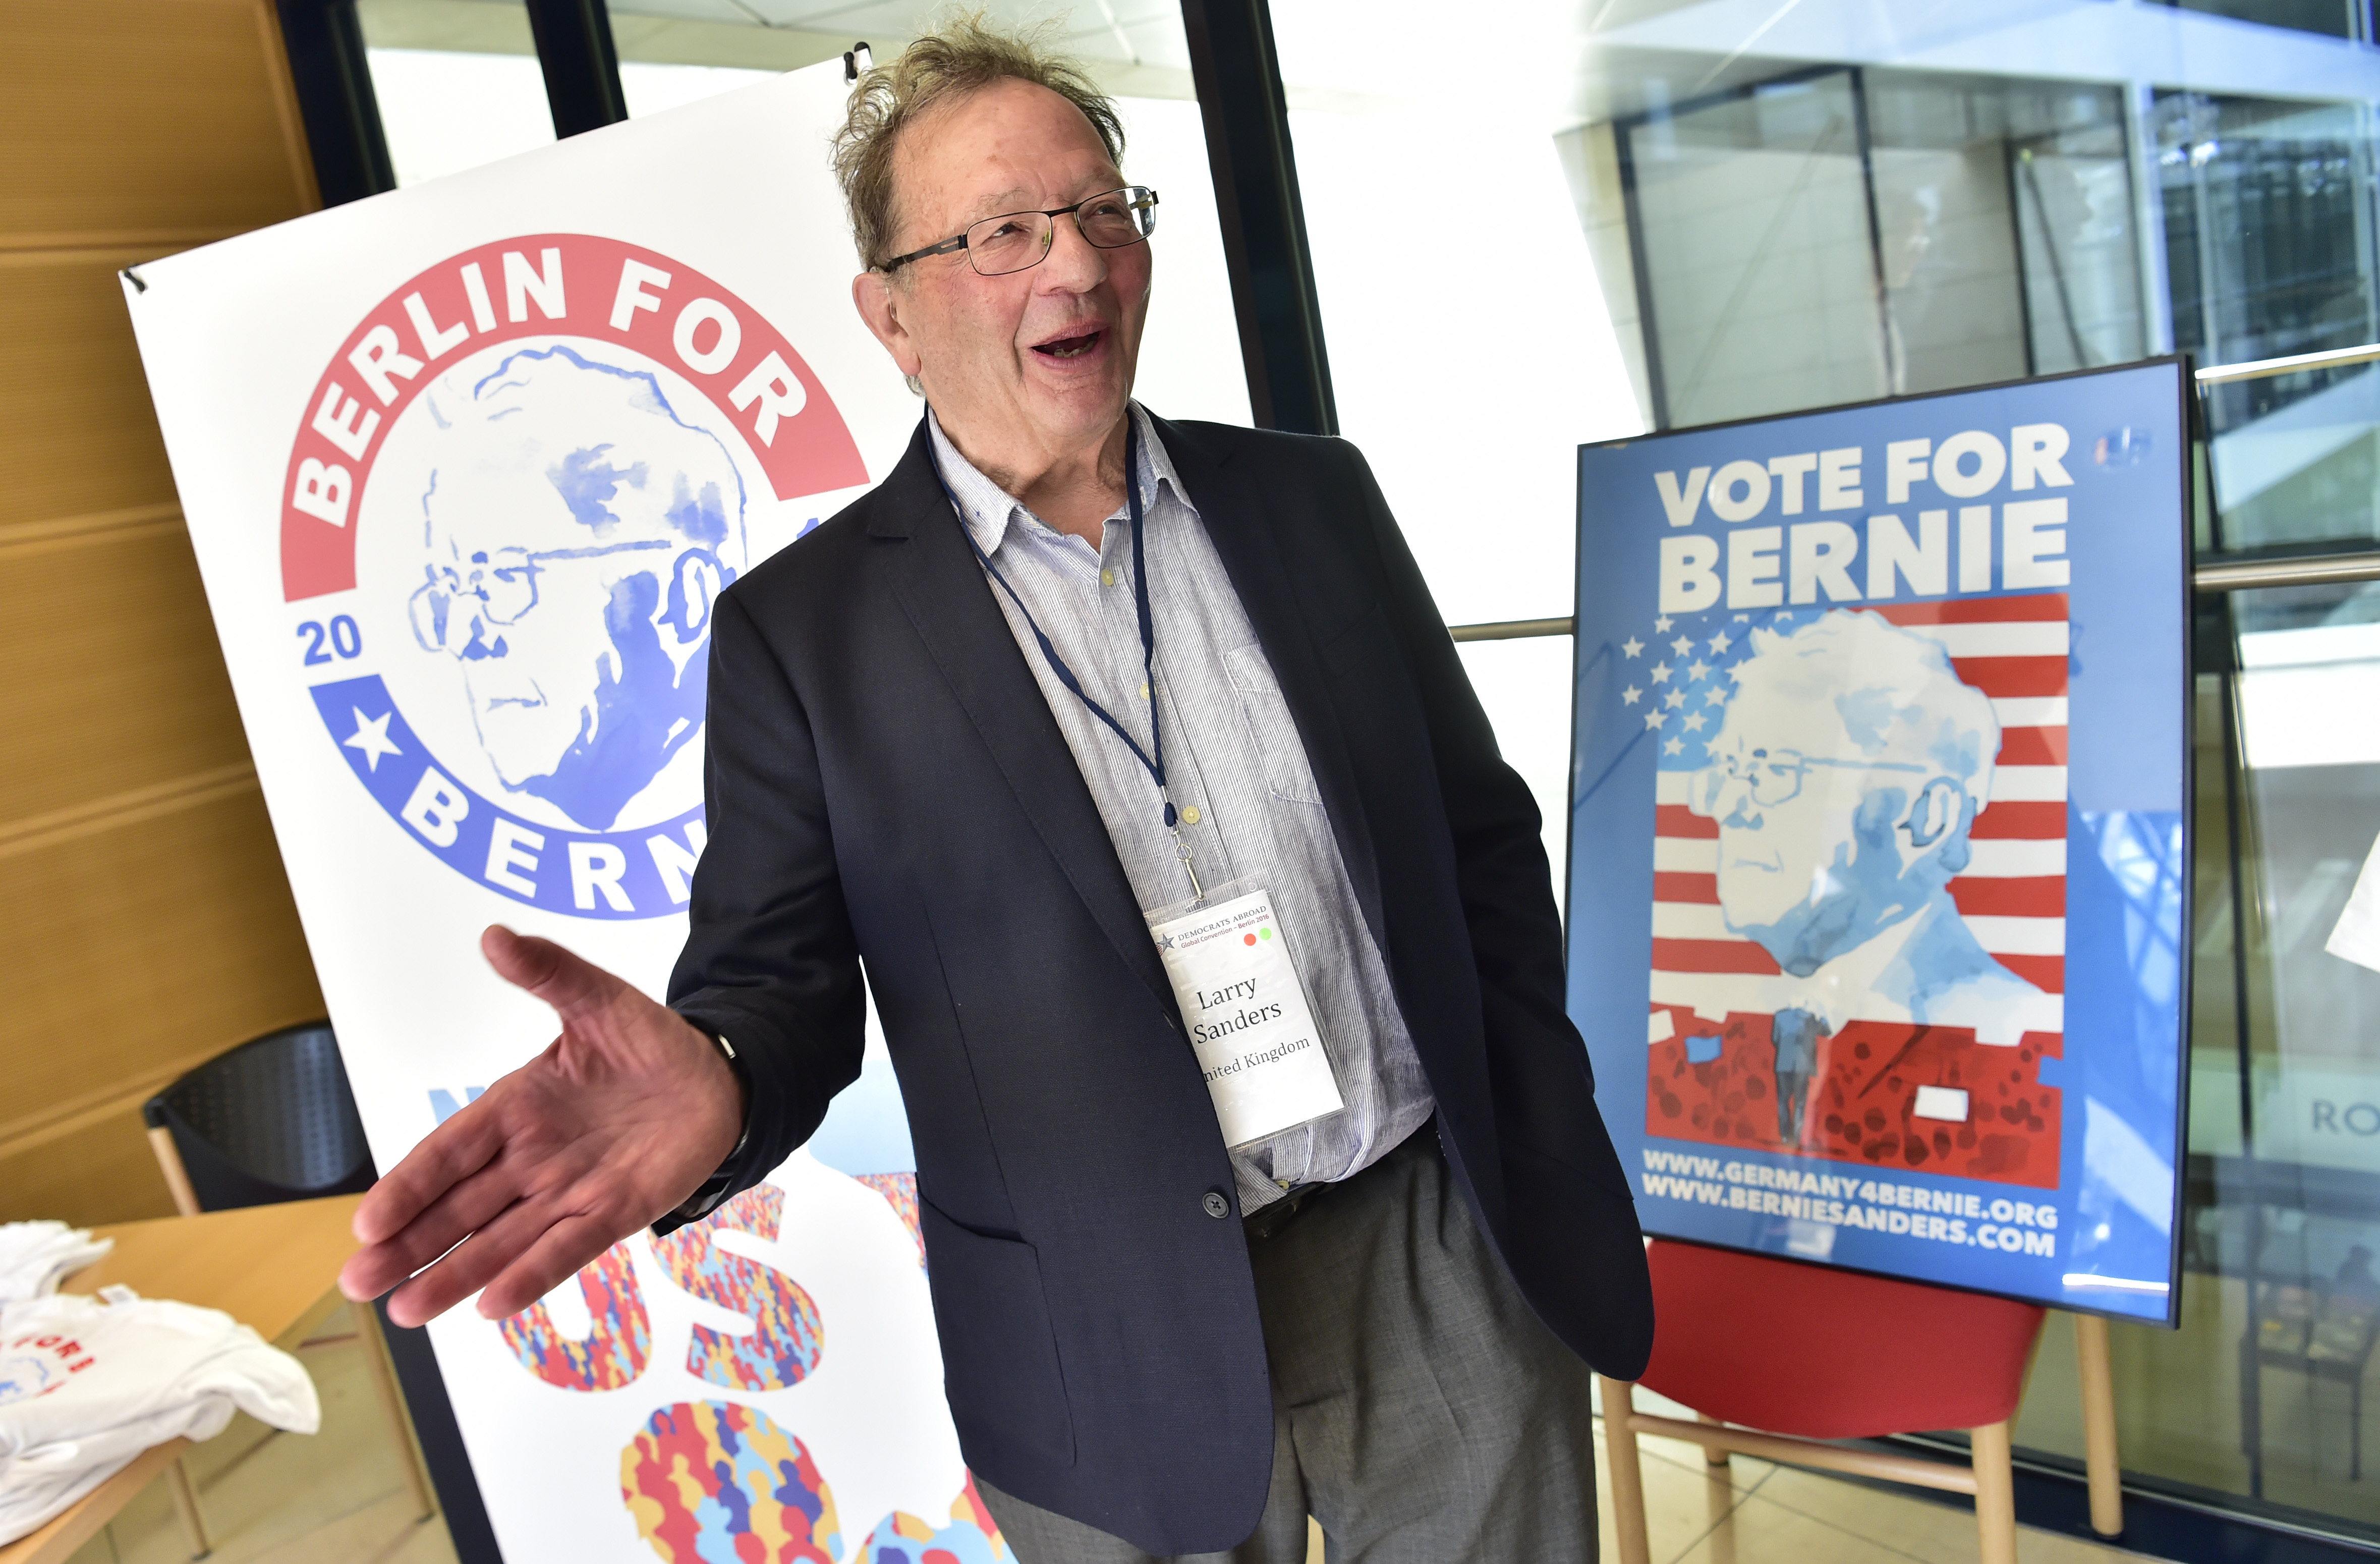 File photo of Larry Sanders, the older brother of Bernie Sanders, speaking to reporters during the Democrats Abroad global convention in Berlin on May 12, 2016 (JOHN MACDOUGALL—AFP/Getty Images)